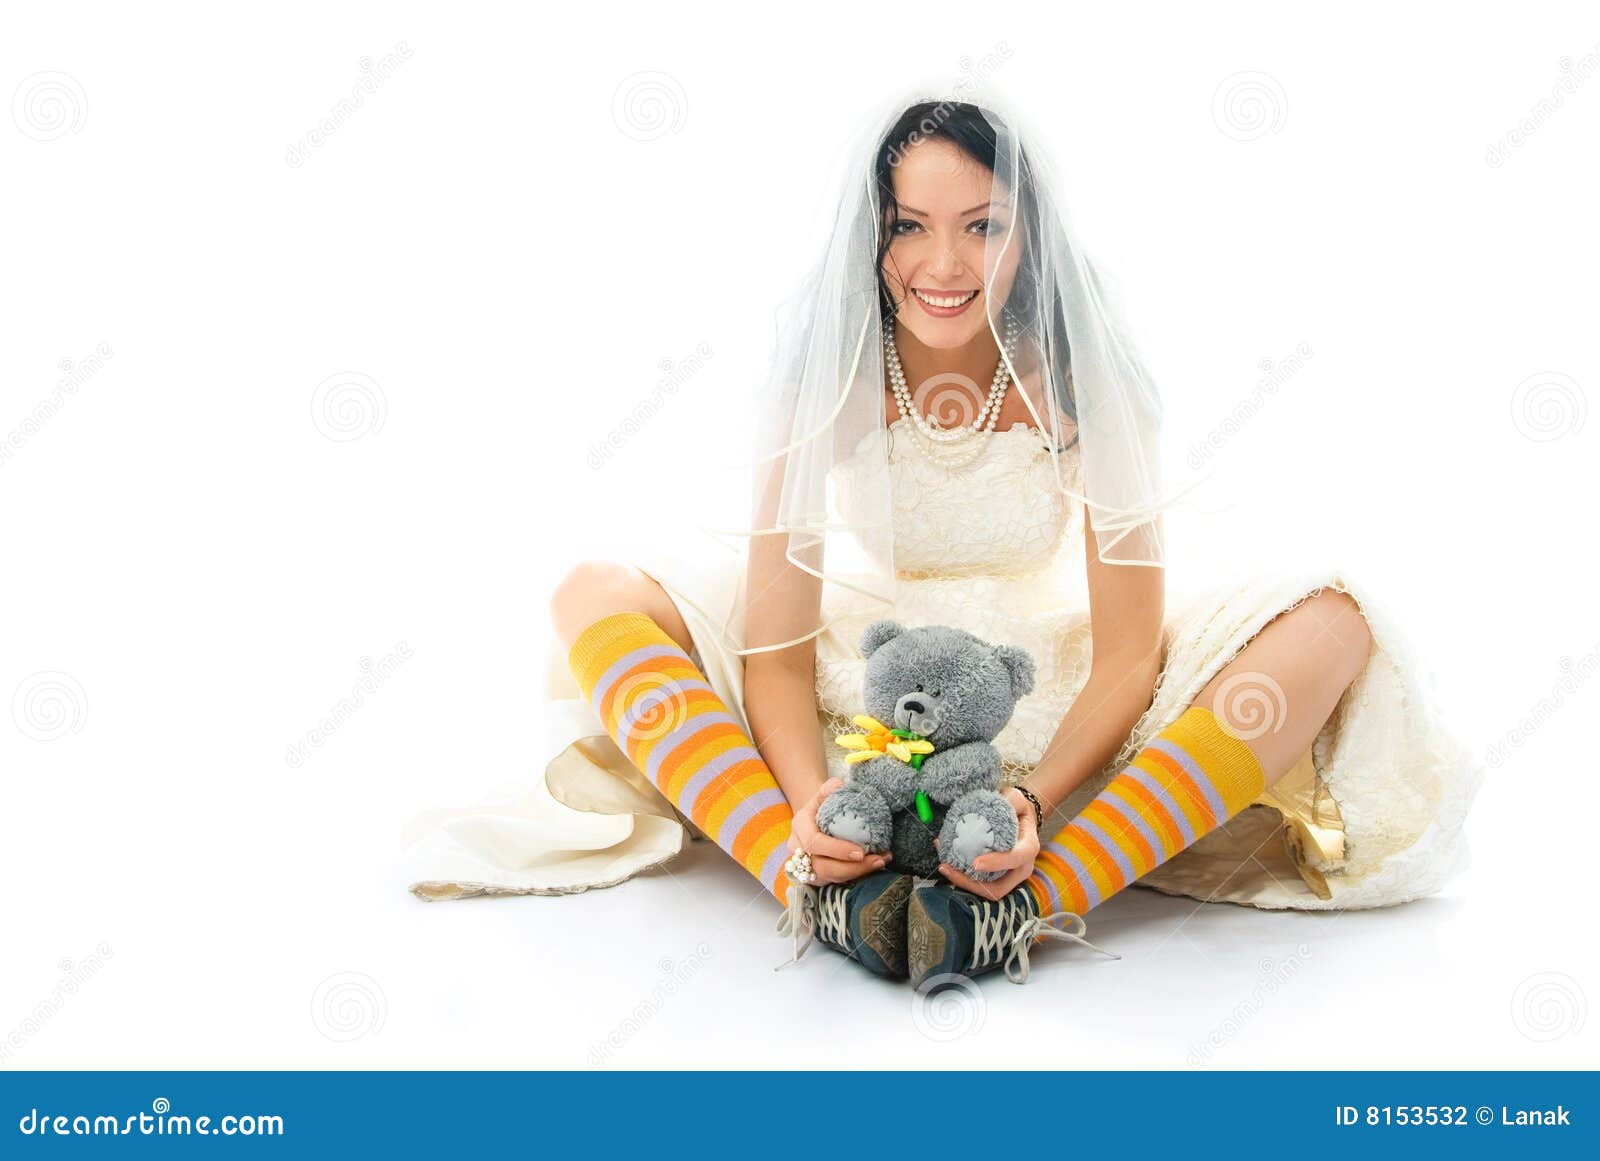 funny bride wearing sporting shoes with a toy